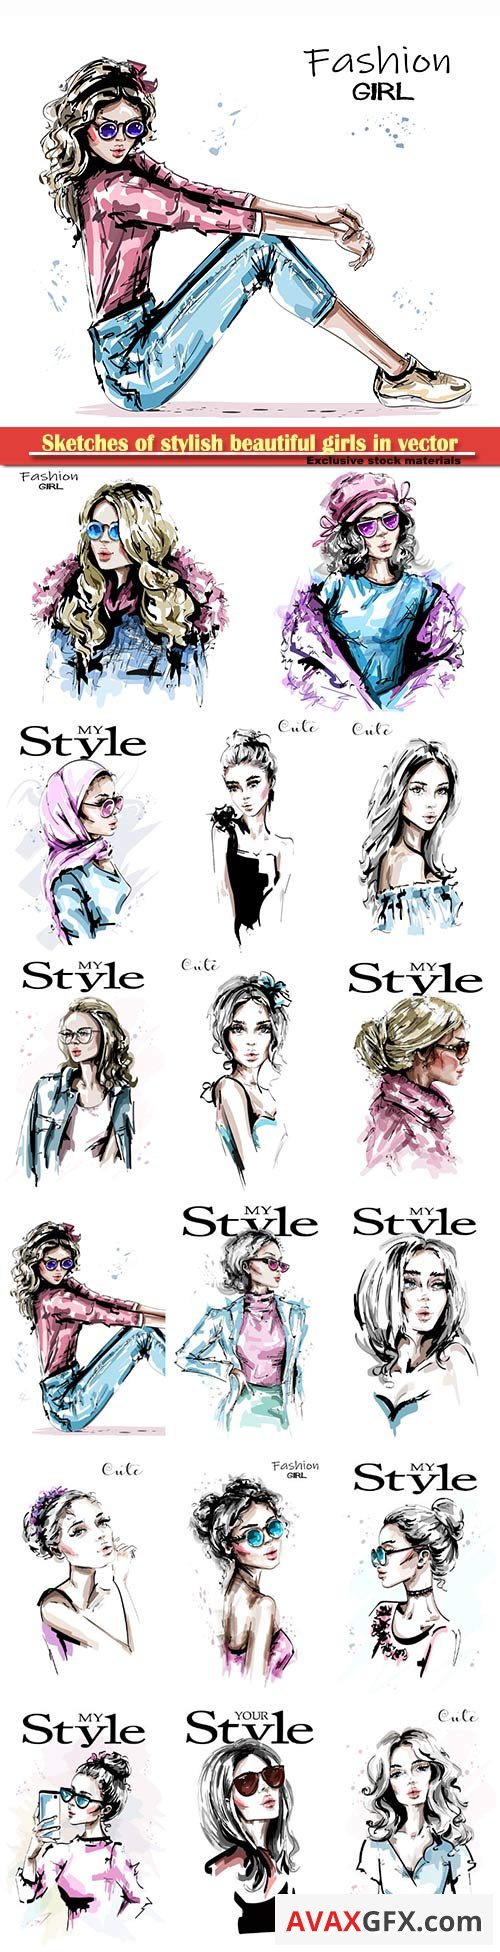 Sketches of stylish beautiful girls in vector